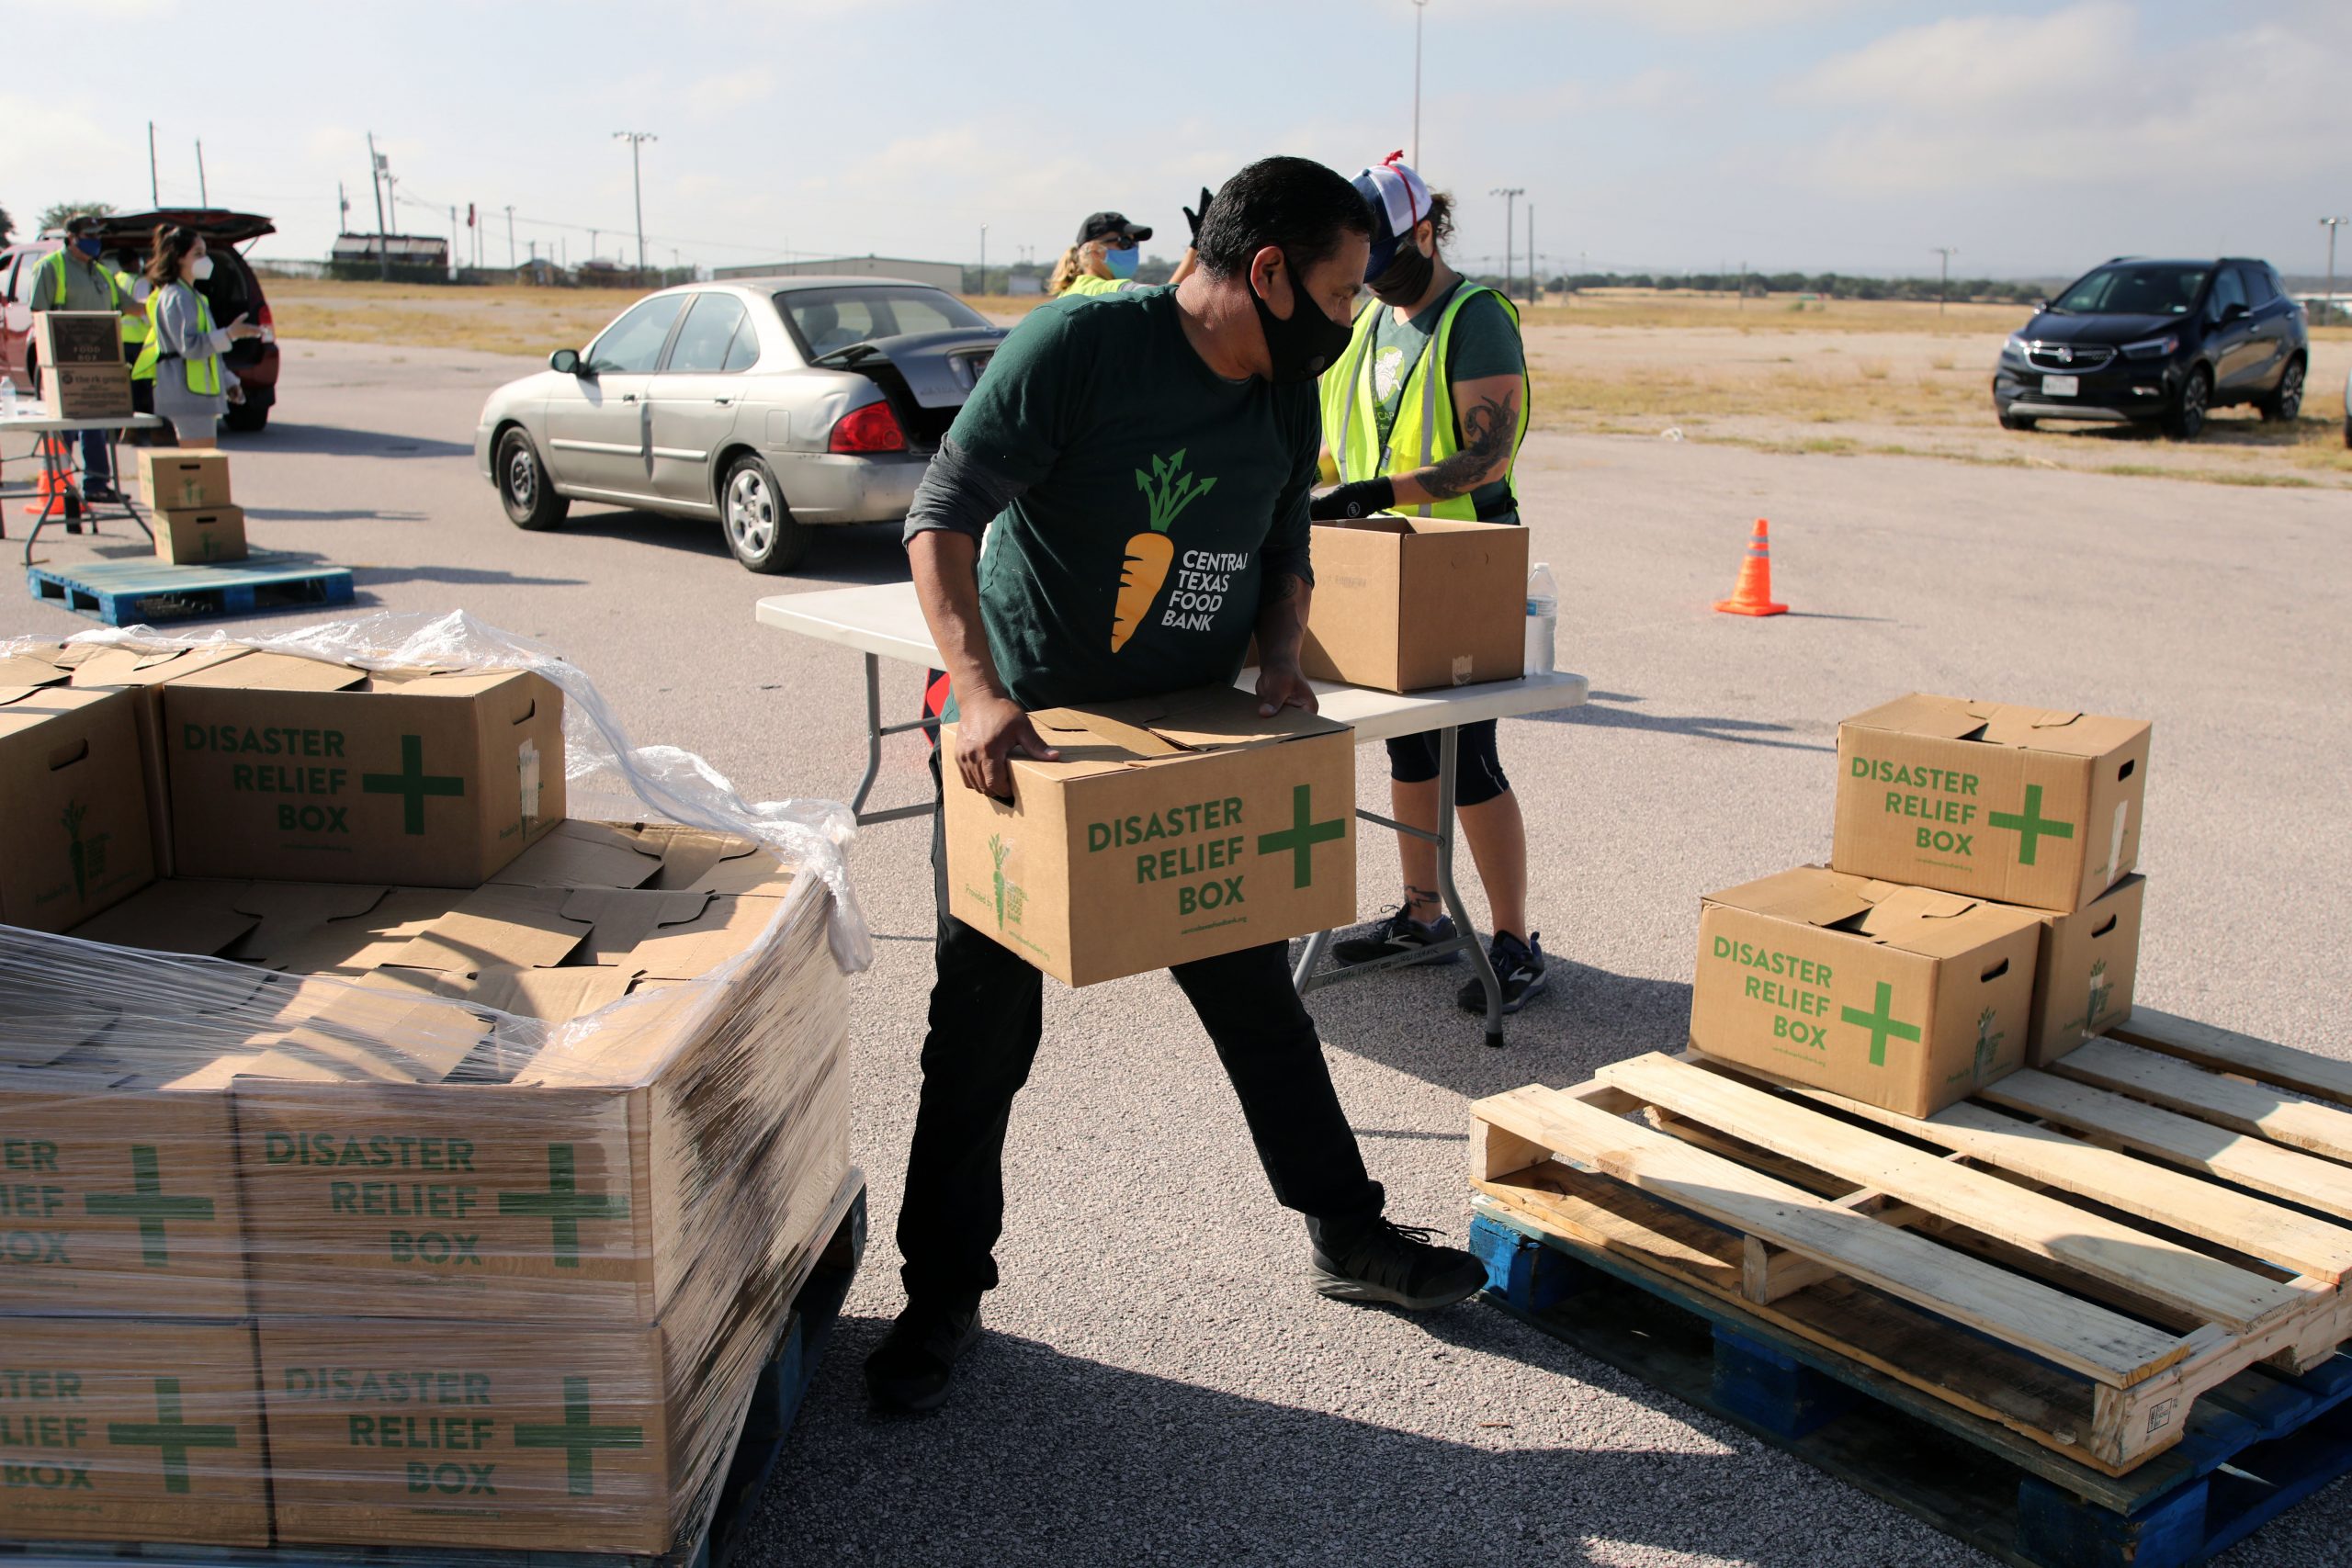 A disaster relief volunteer offering crucial aid. Sparkrock 365 ERP enables efficient disaster response, ensuring organizations have more time and resources to address urgent needs through advanced technology.